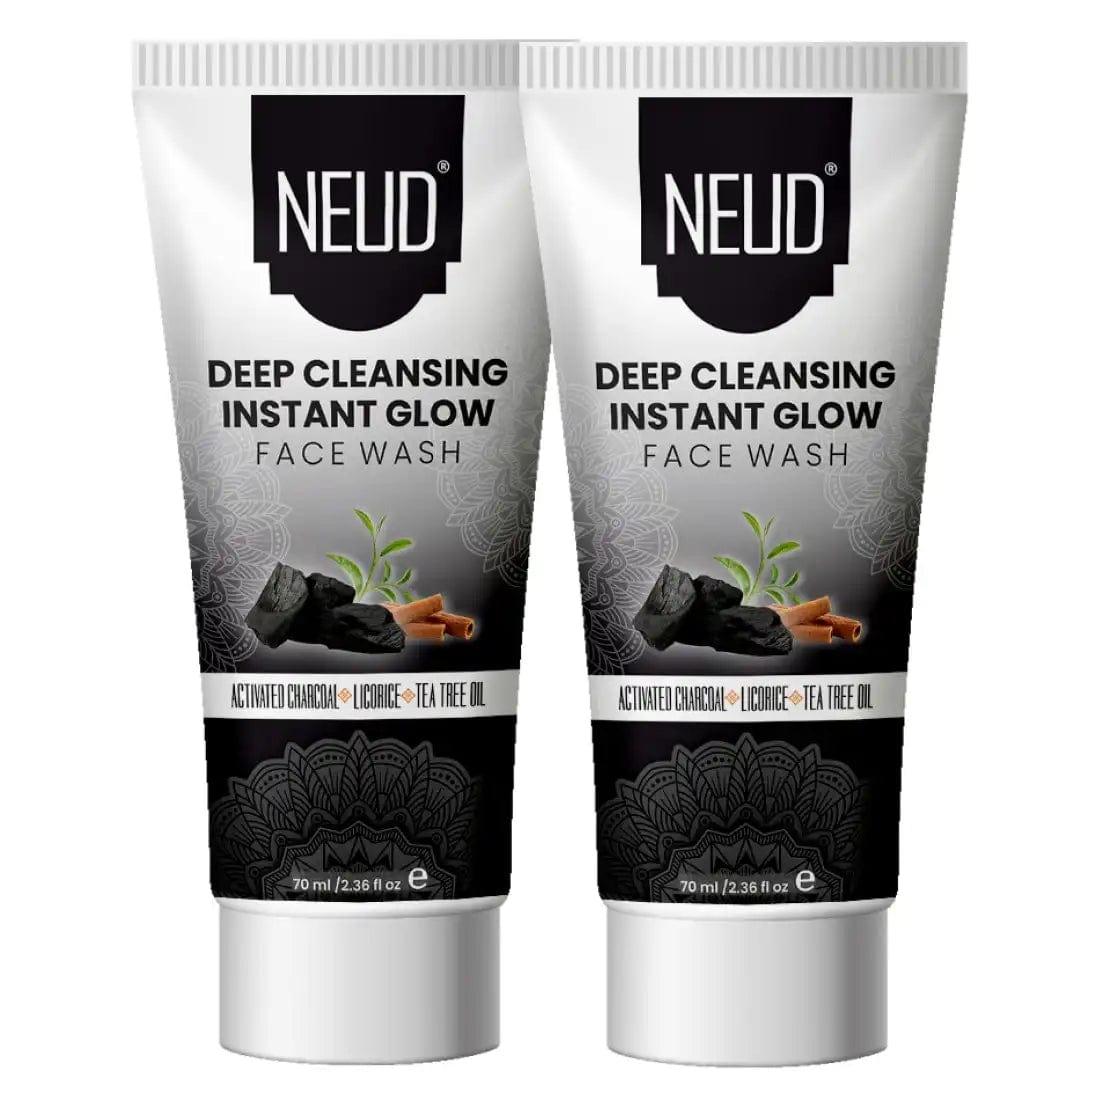 Buy 2 Packs NEUD Deep Cleansing Instant Glow Face Wash for Men and Women - 70ml